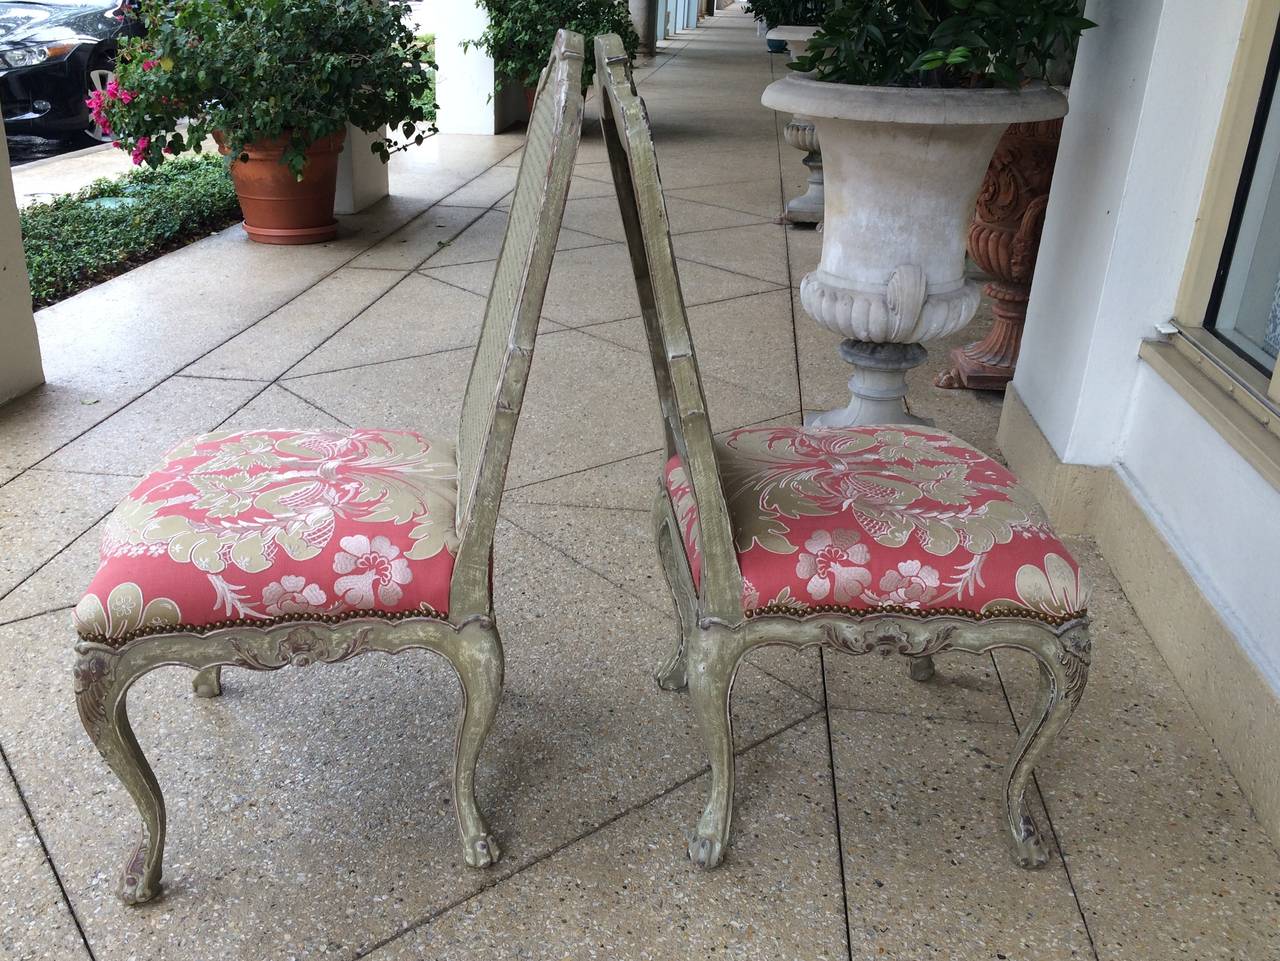 Pair of 18th century style Italian side chairs, carved wood with cane back, distressed green/grey antique finish